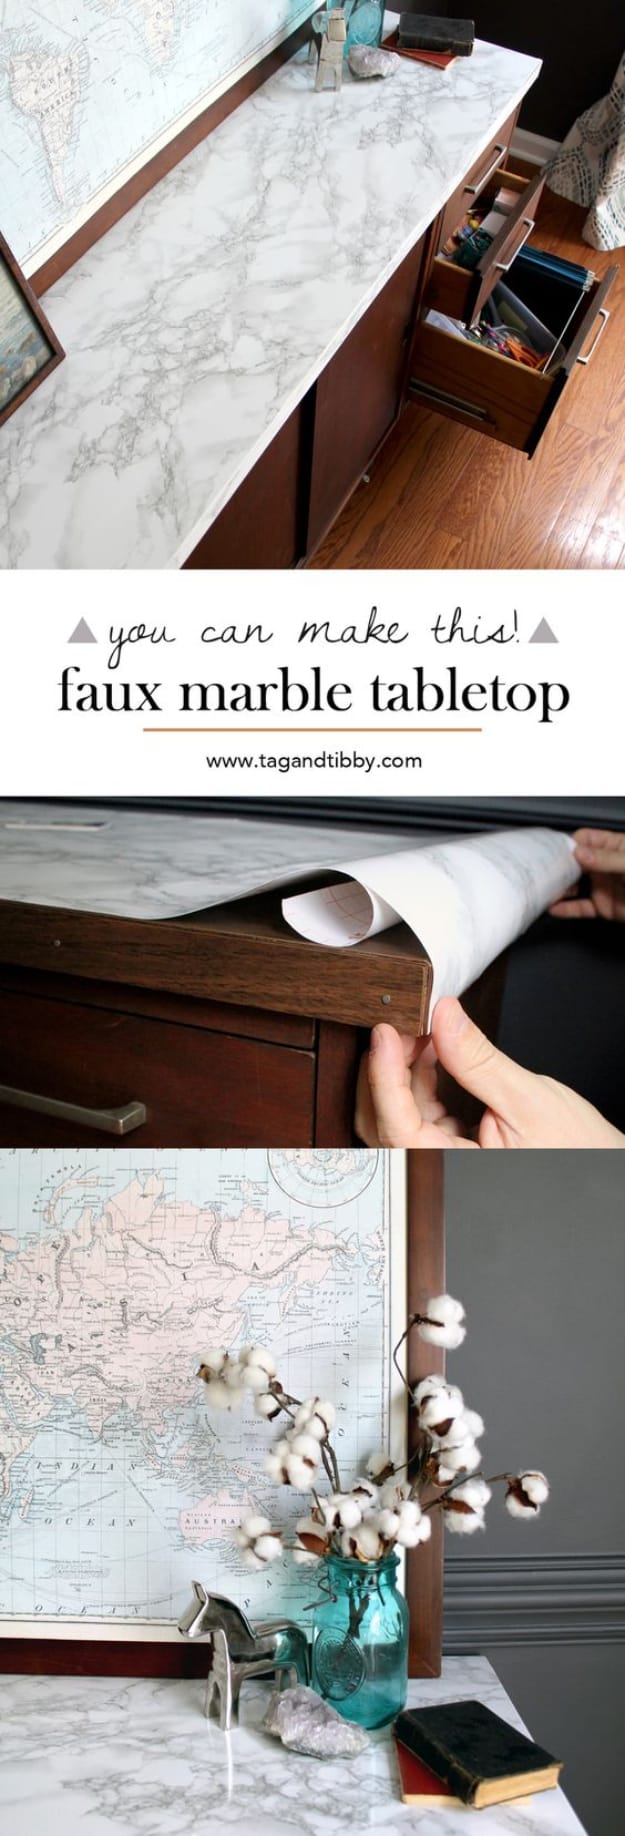 DIY Faux Marble Ideas - Faux Marble Table Top - Easy Crafts and DIY Projects With Faux Marbling Tutorials - Paint and Decorate Home Decor, Creative DIY Gifts and Office Accessories 